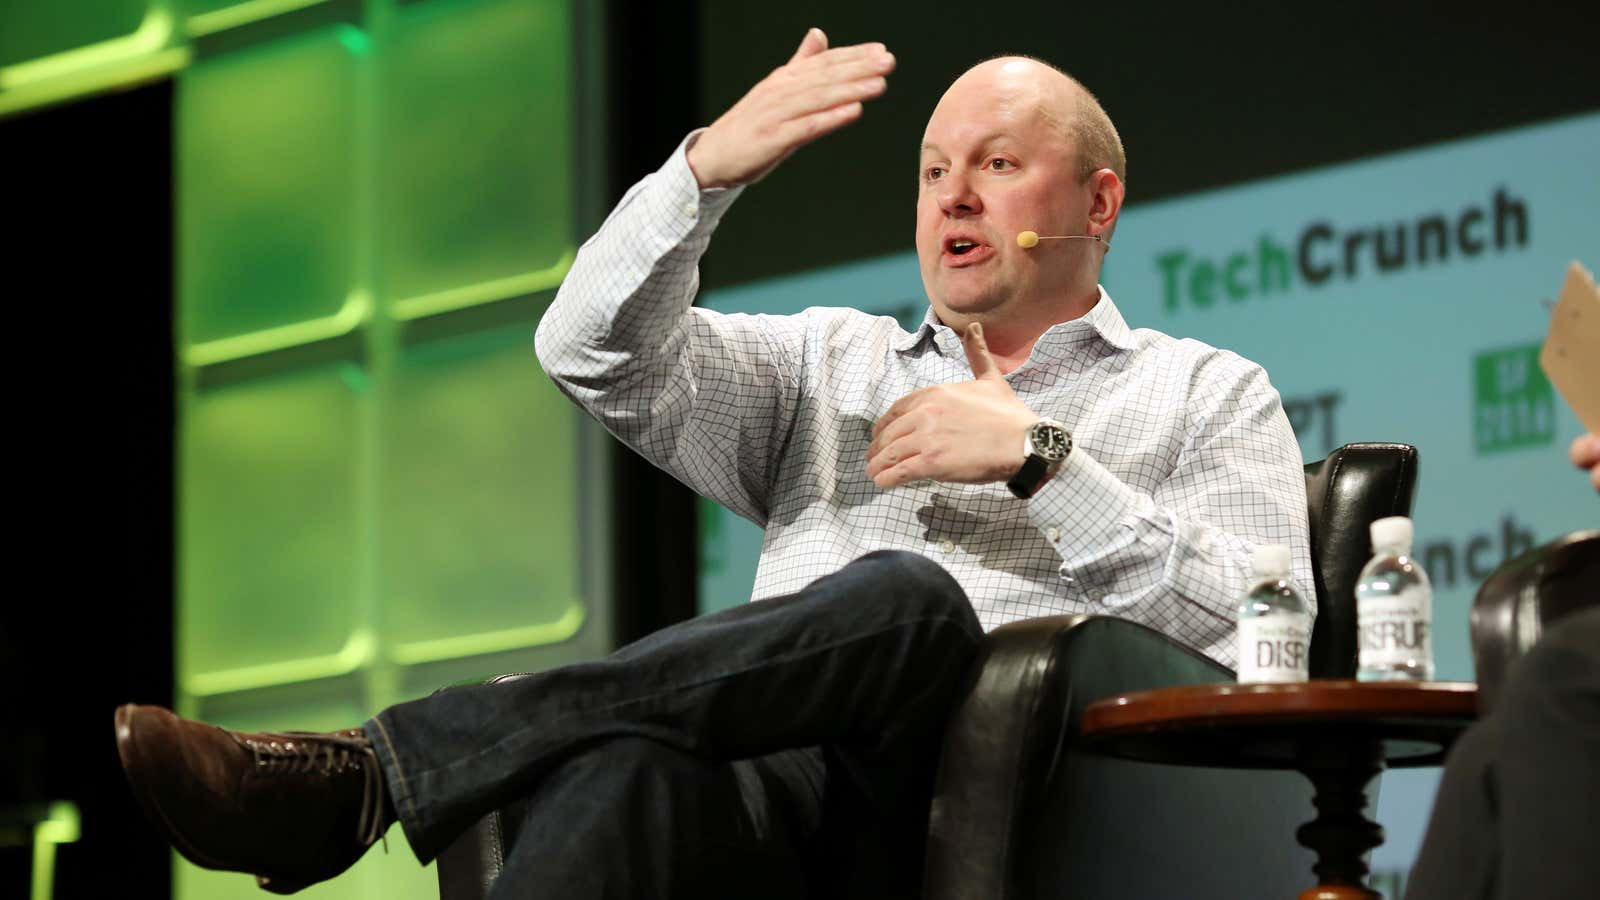 A16z’s co-founder Marc Andreessen is a crypto fan.